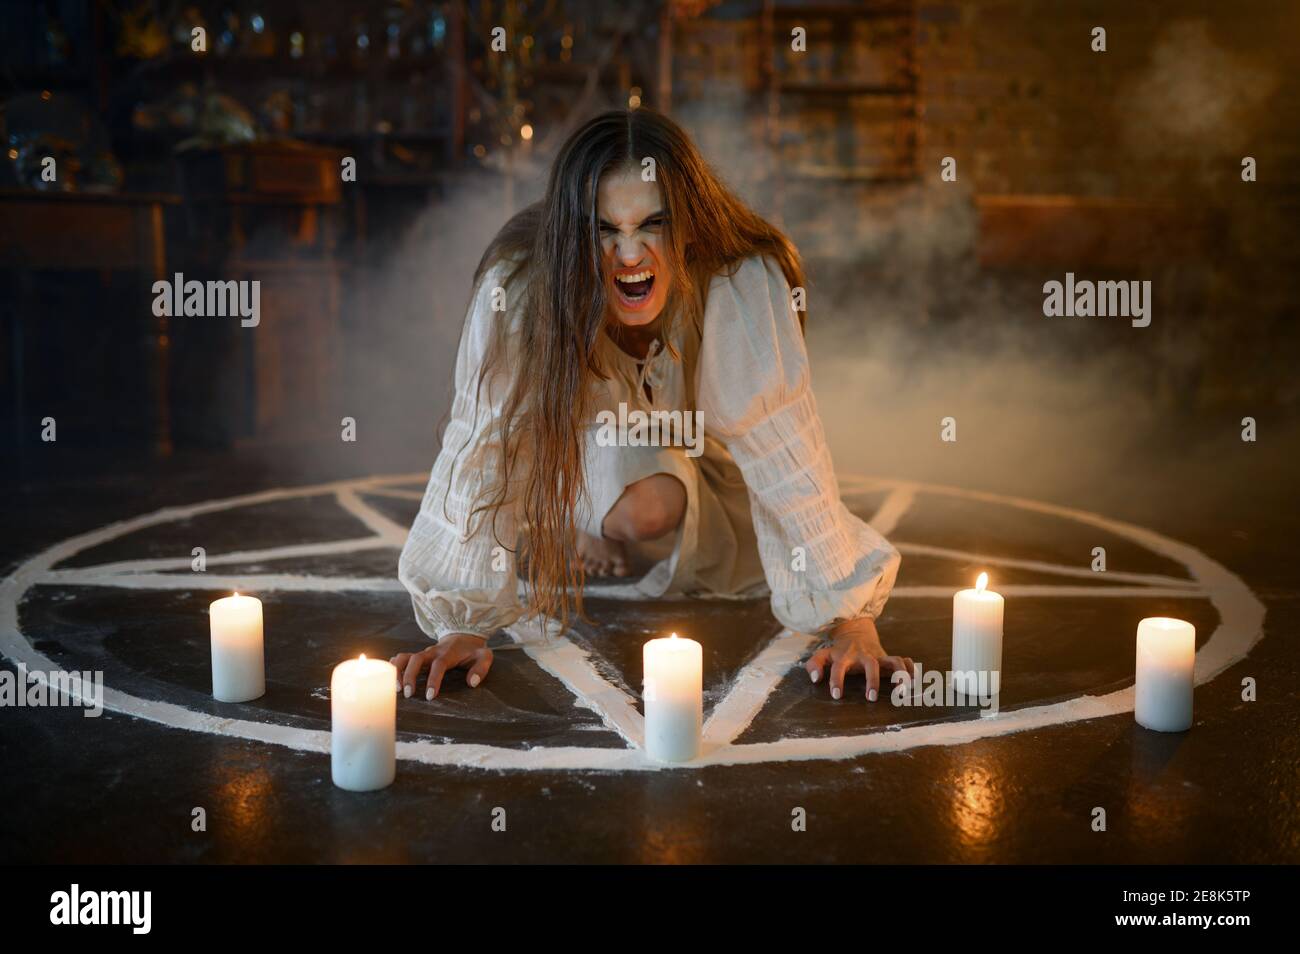 Crazy woman sitting in magic circle with candles Stock Photo